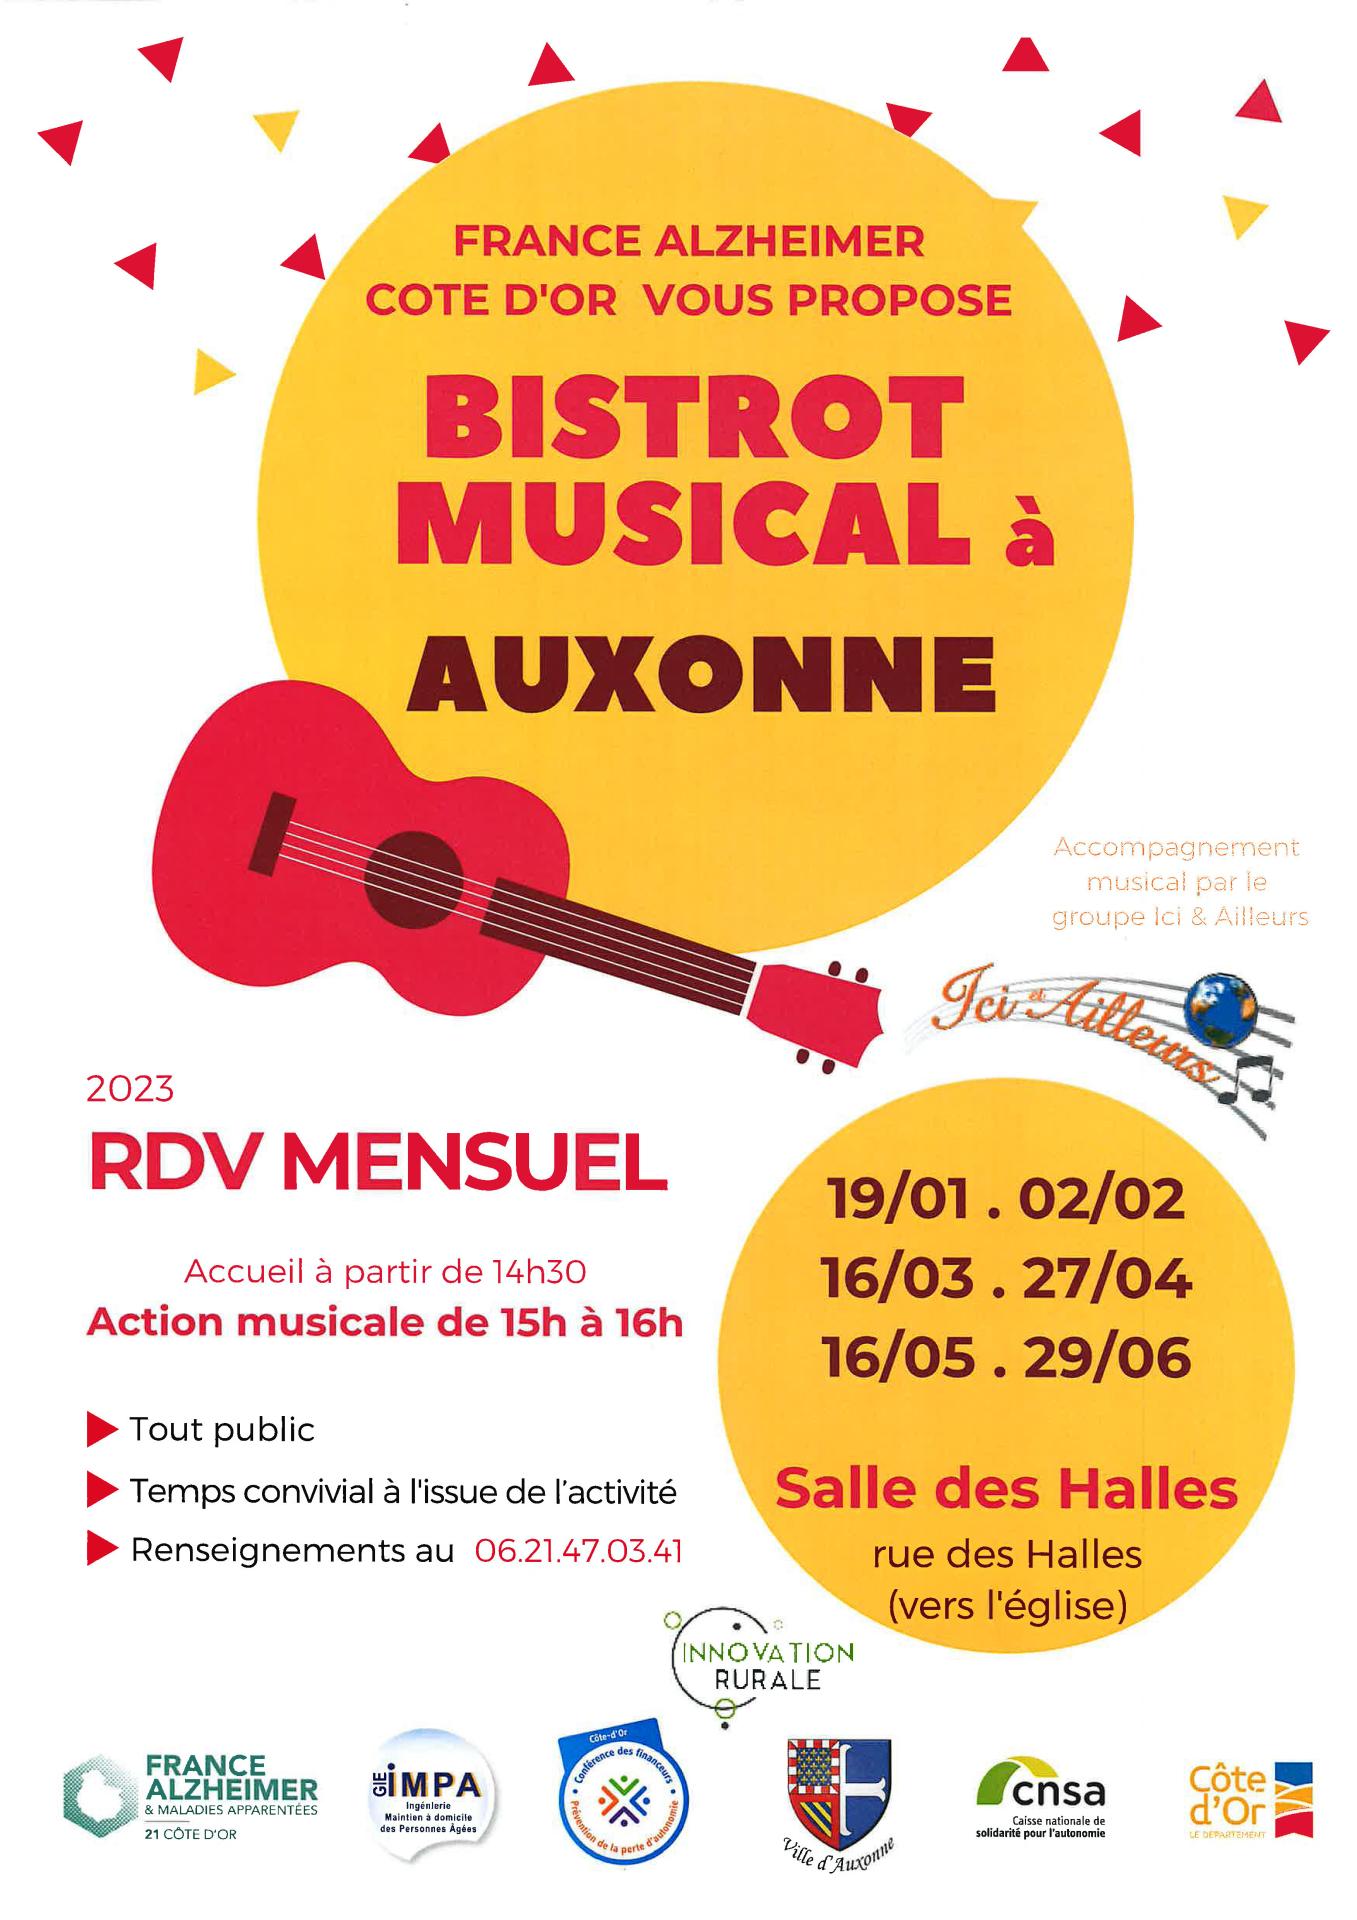 Bistrot musical